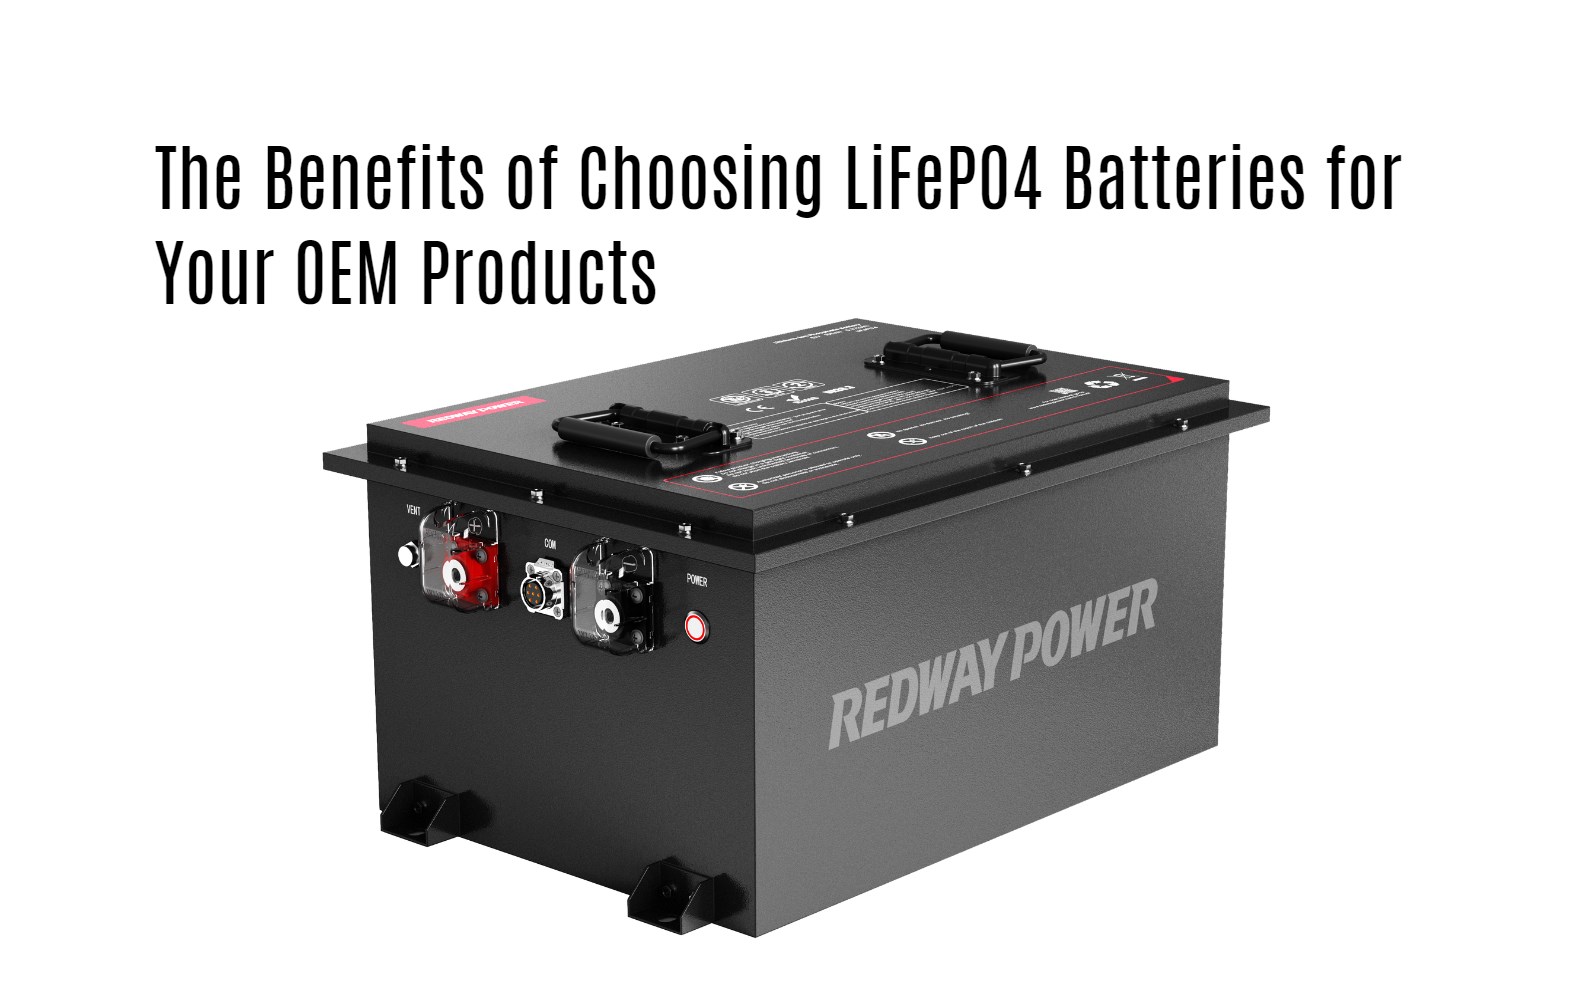 The Benefits of Choosing LiFePO4 Batteries for Your OEM Products